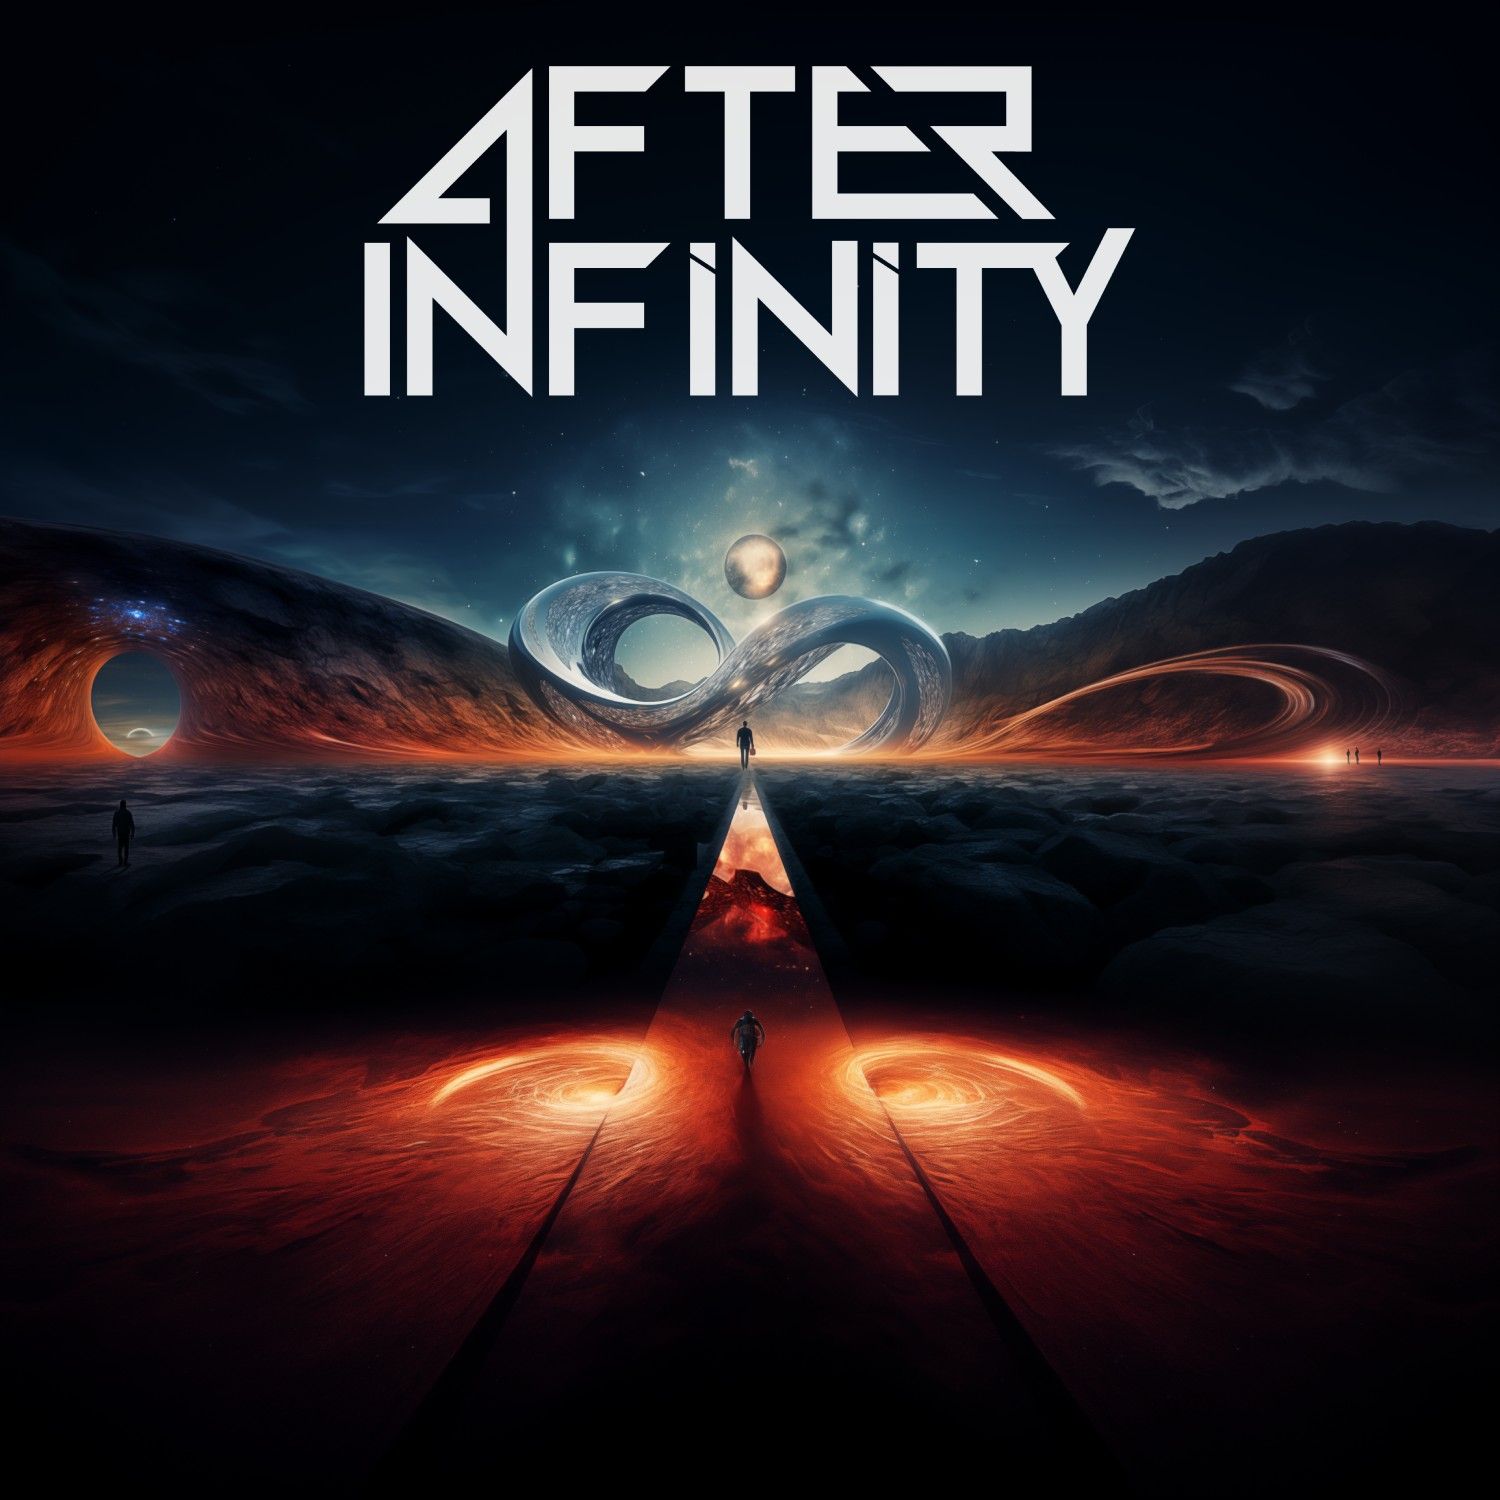 After Infinity (Power Metal)